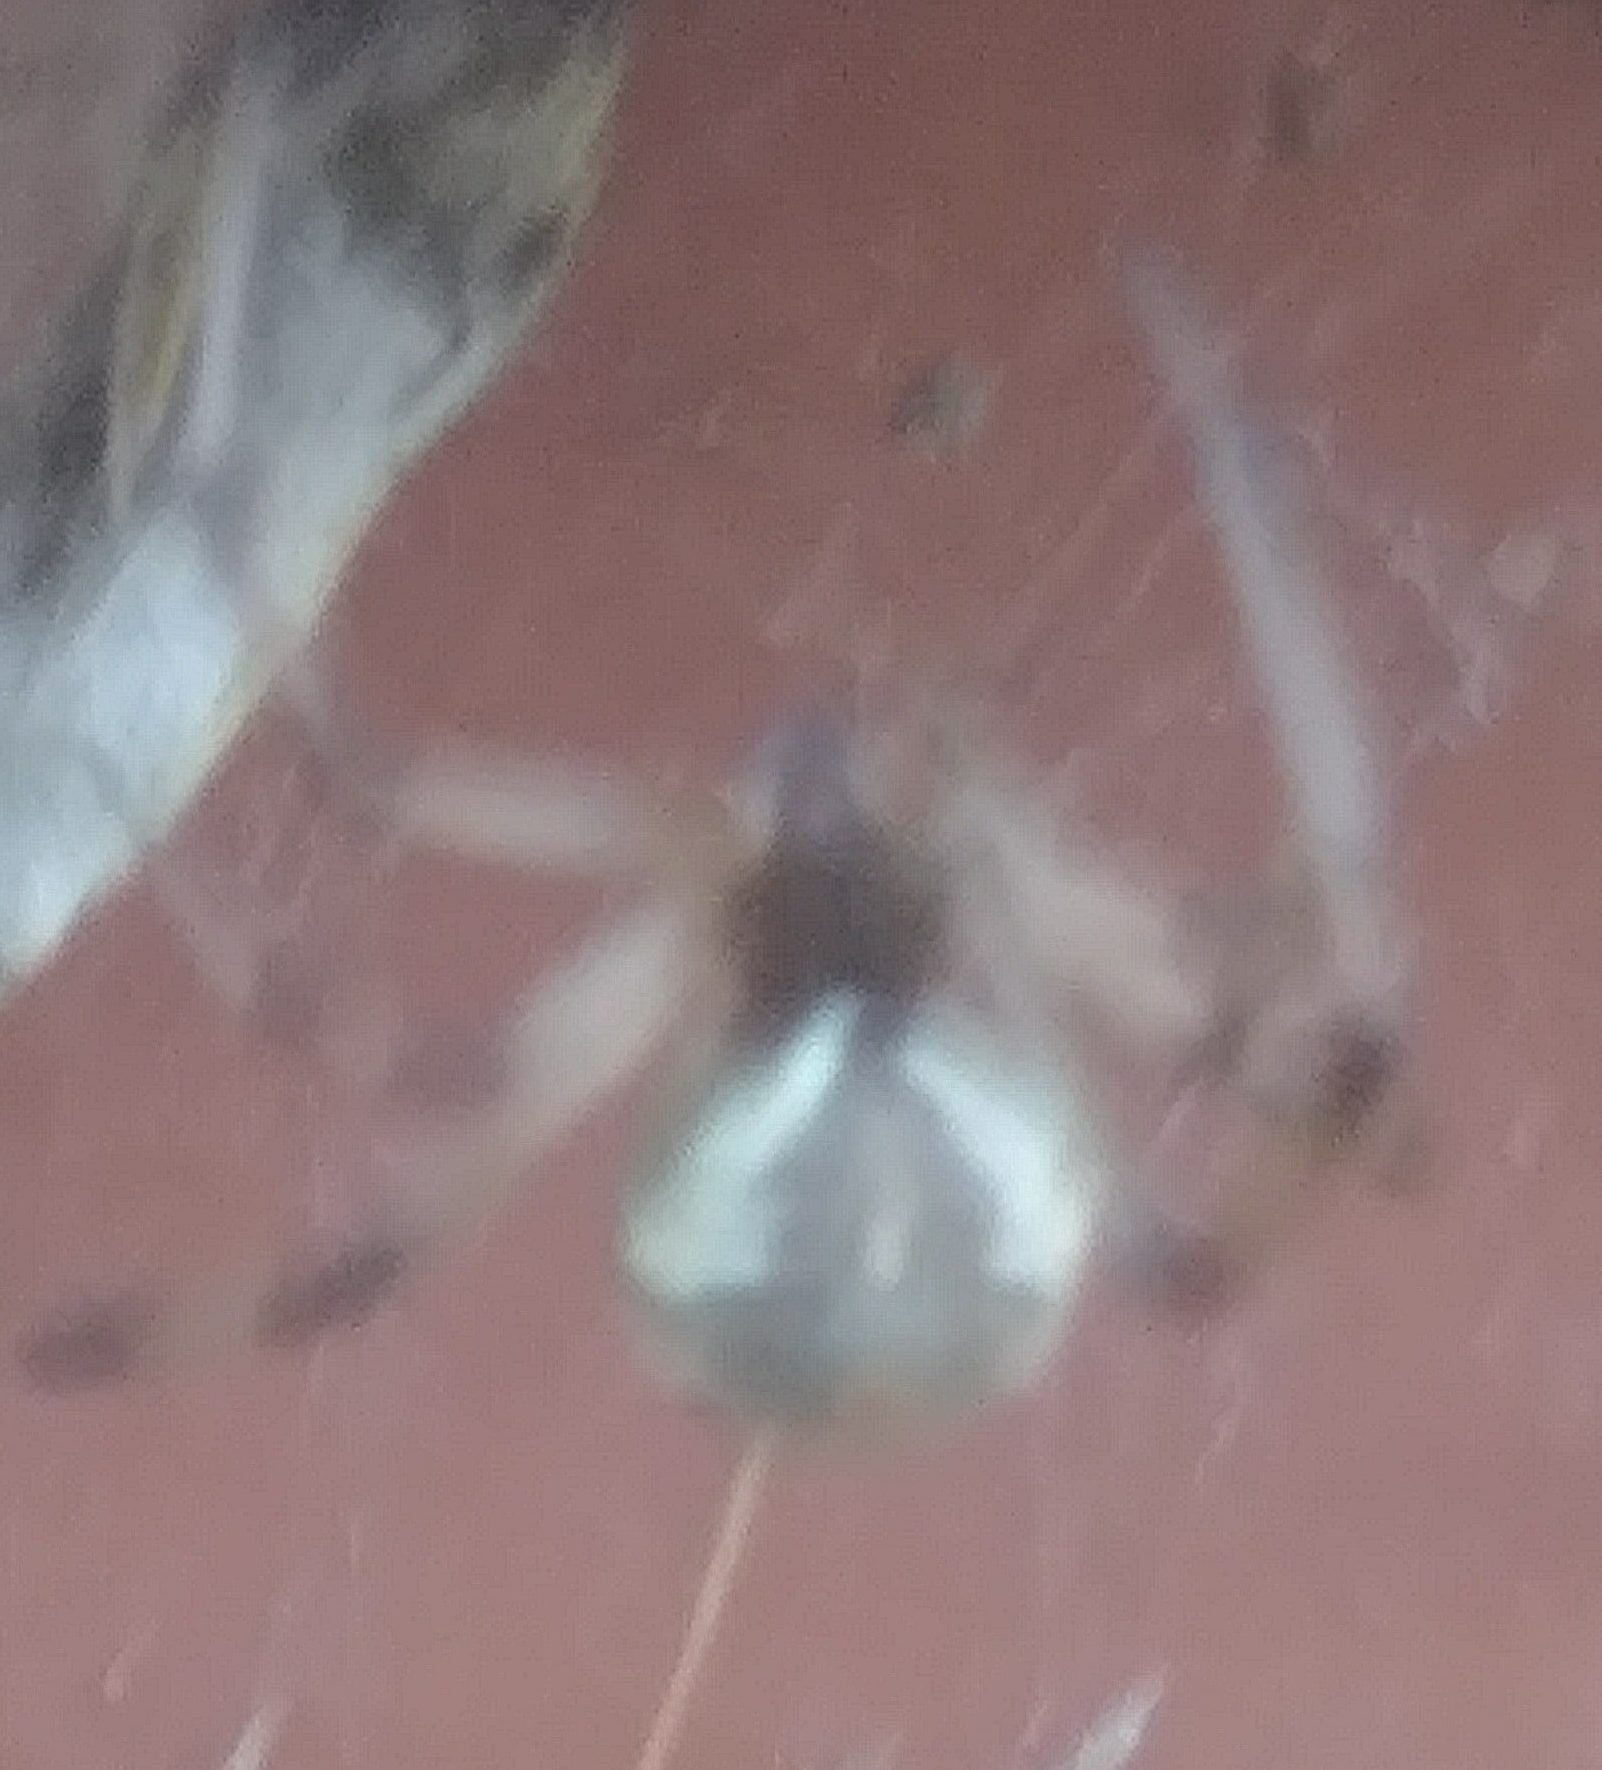 Picture of Latrodectus geometricus (Brown Widow Spider) - Dorsal